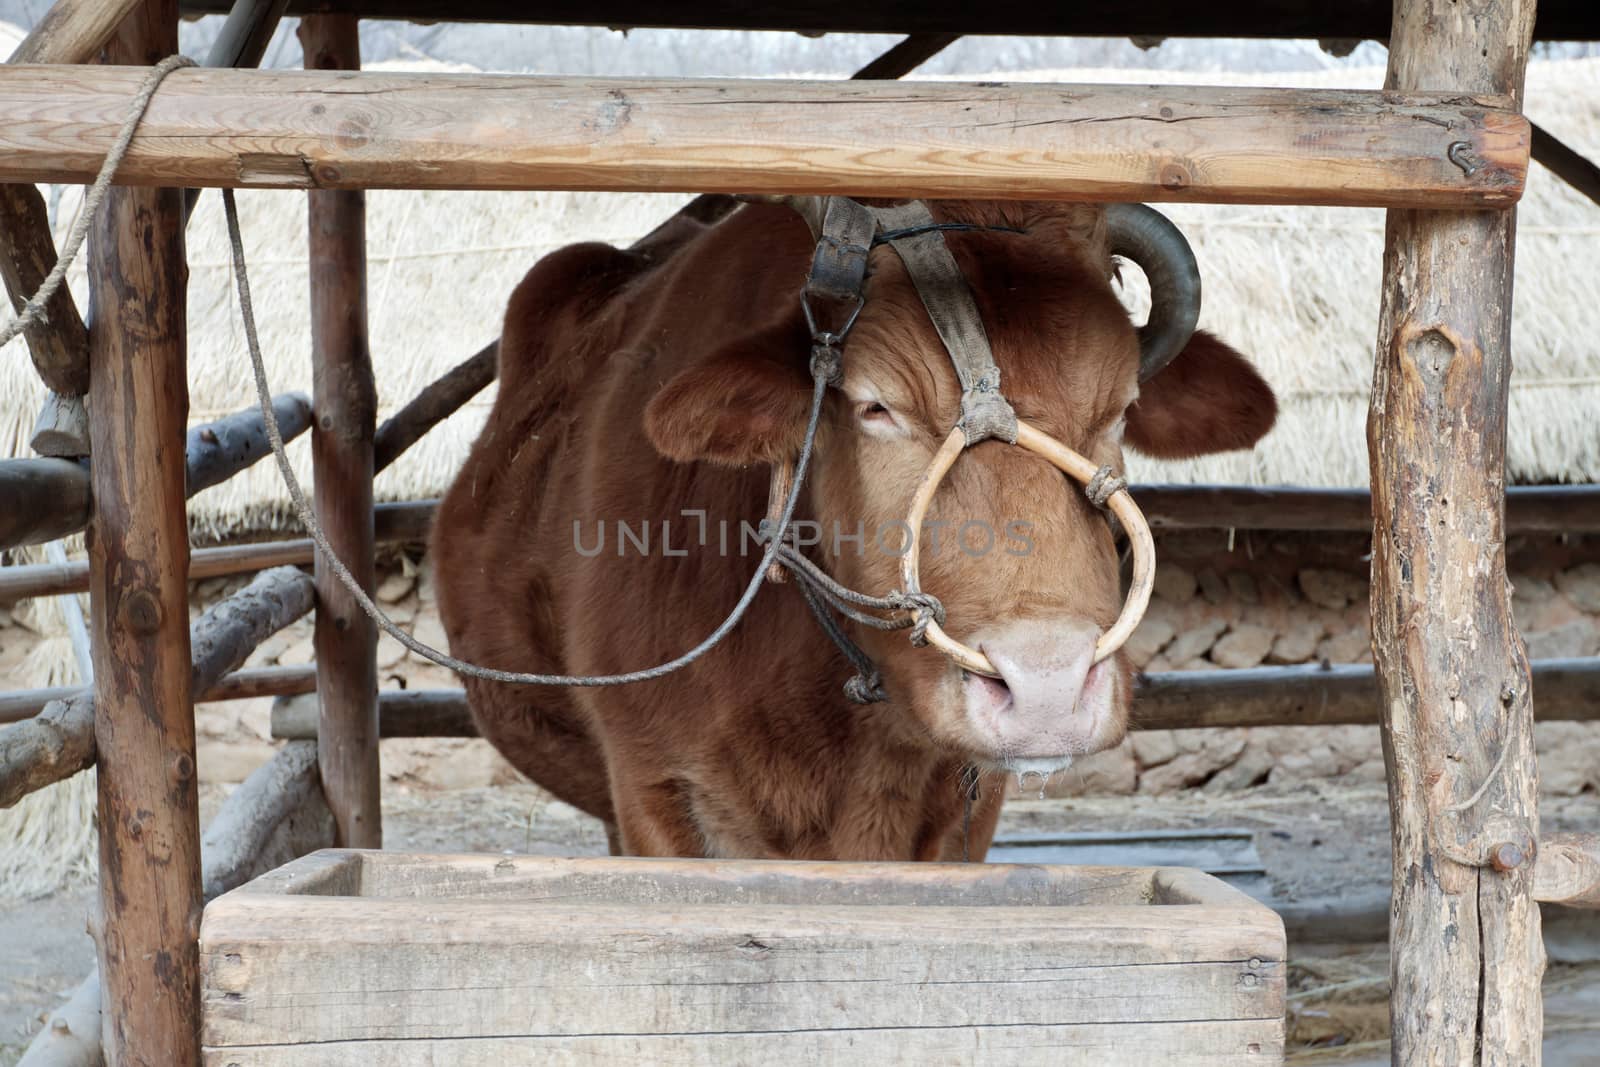 A cow with a nose ring standing in a wooden stall